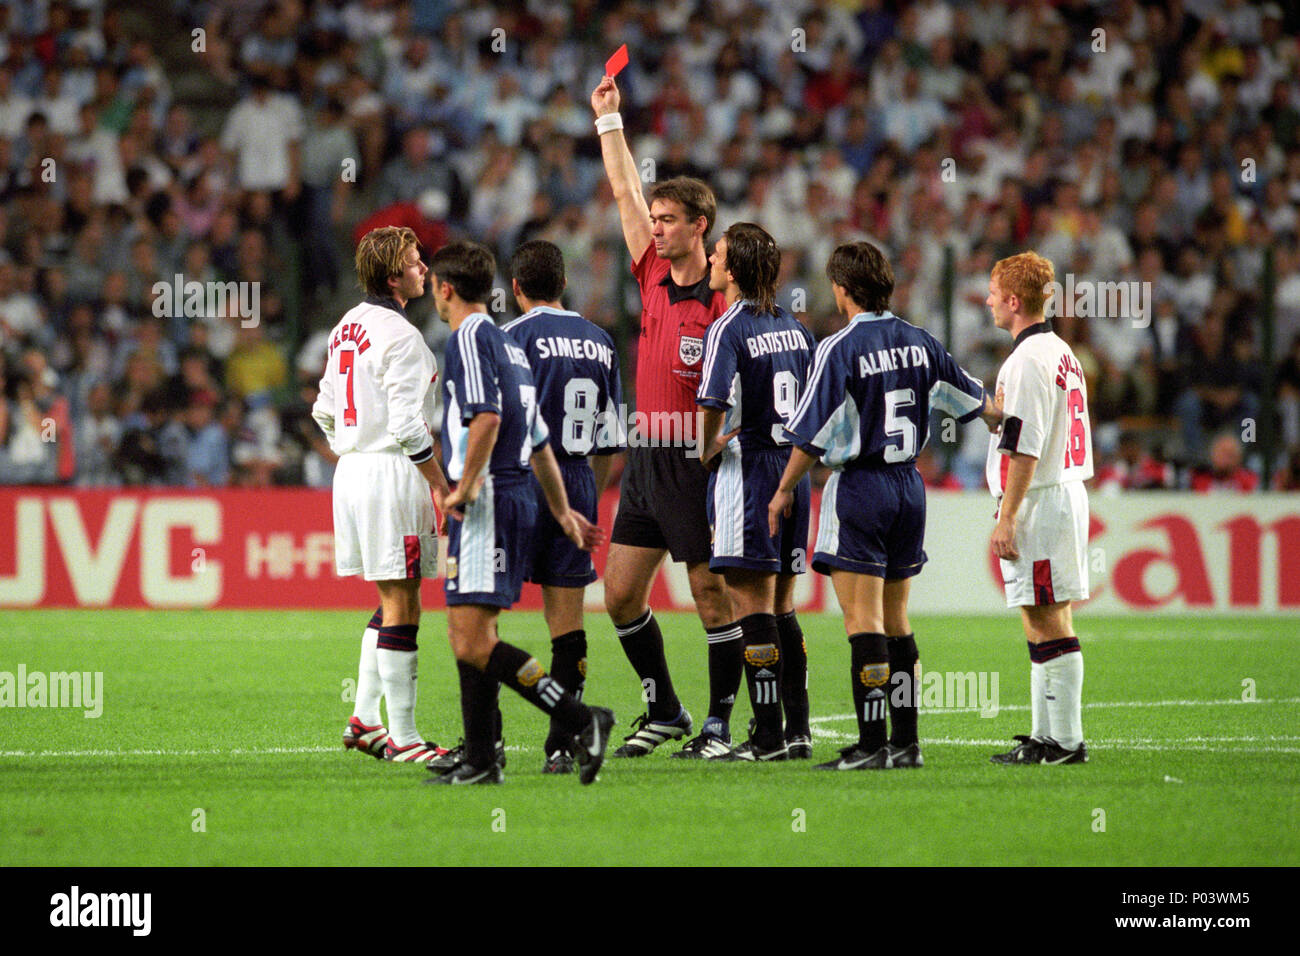 File photo dated 30-06-1998 of England's David Beckham (L) is given the red card by Danish referee Kim Milton Nielsen, after a foul on Argentina's Diego Simeone during their France '98 World Cup second round match held in St Etienne. argentina won the match 4-3 on penalties (2-2 after extra time). Stock Photo